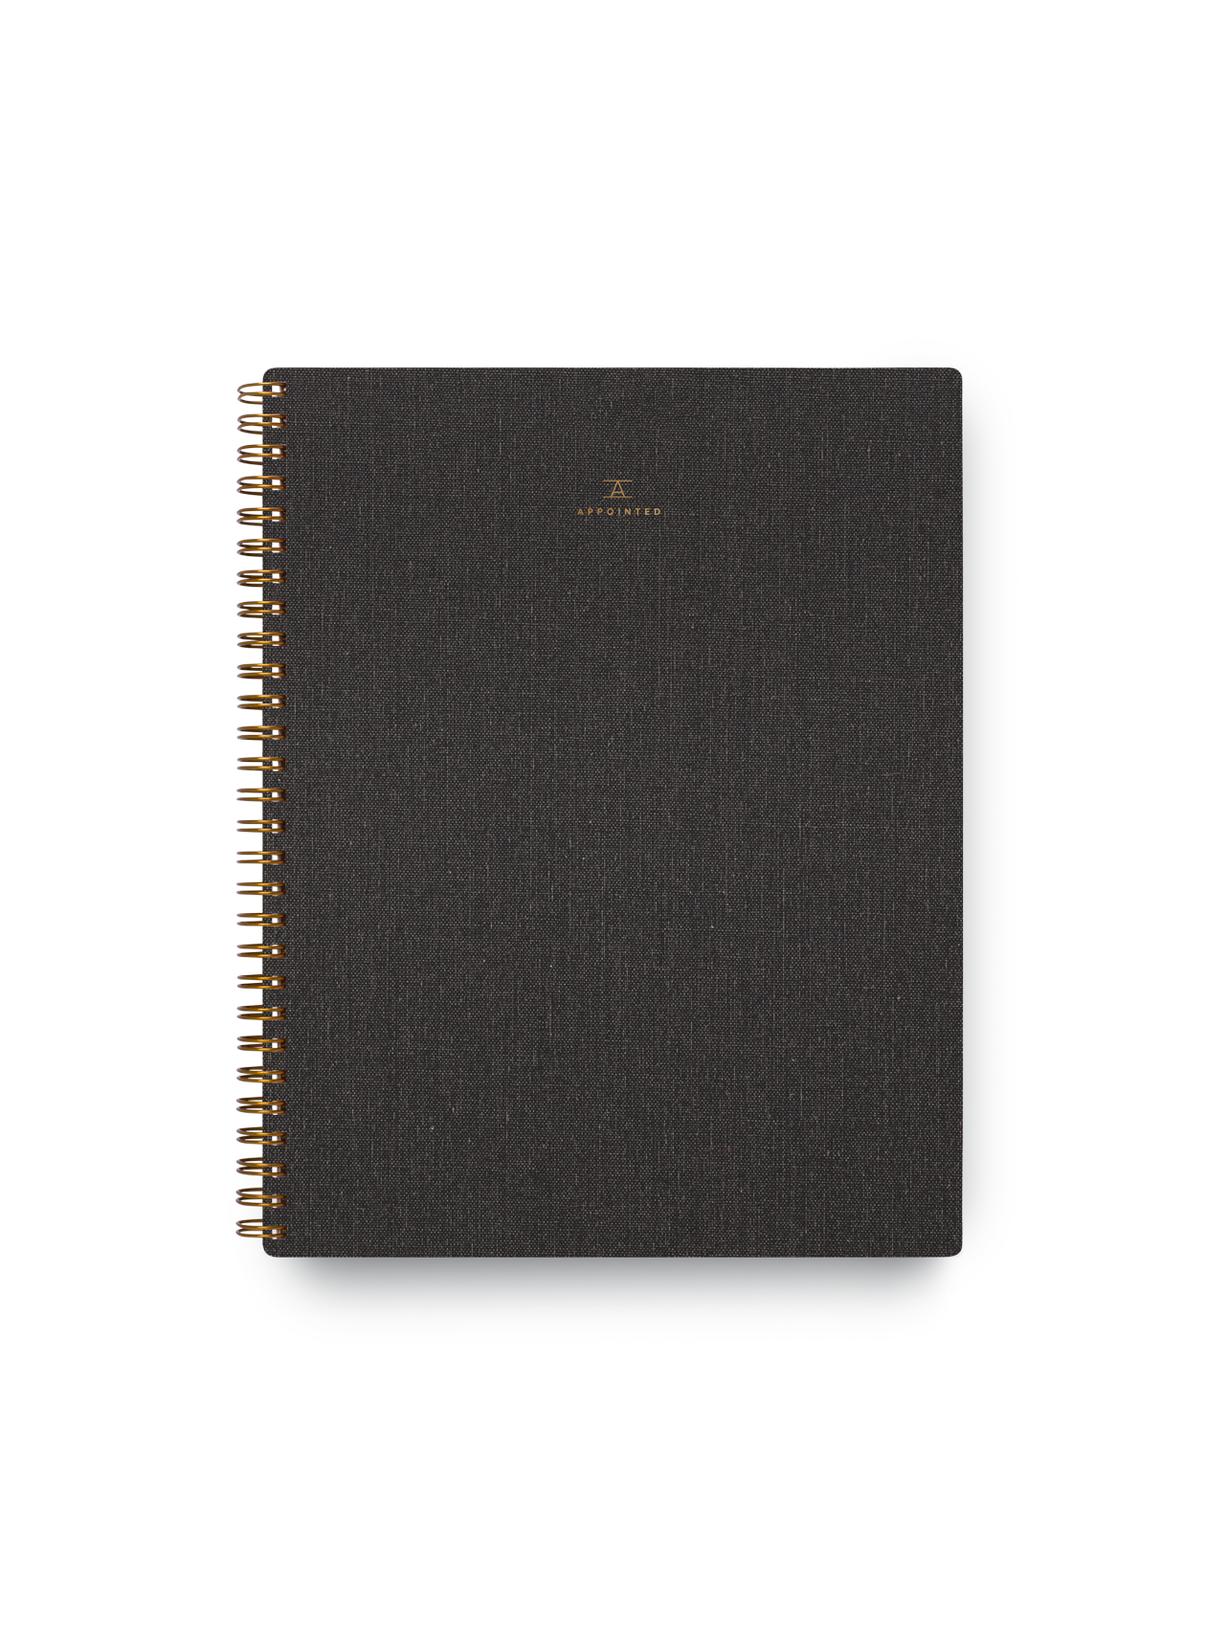 The Notebook with bookcloth covers and brass wire-o binding || Charcoal Gray